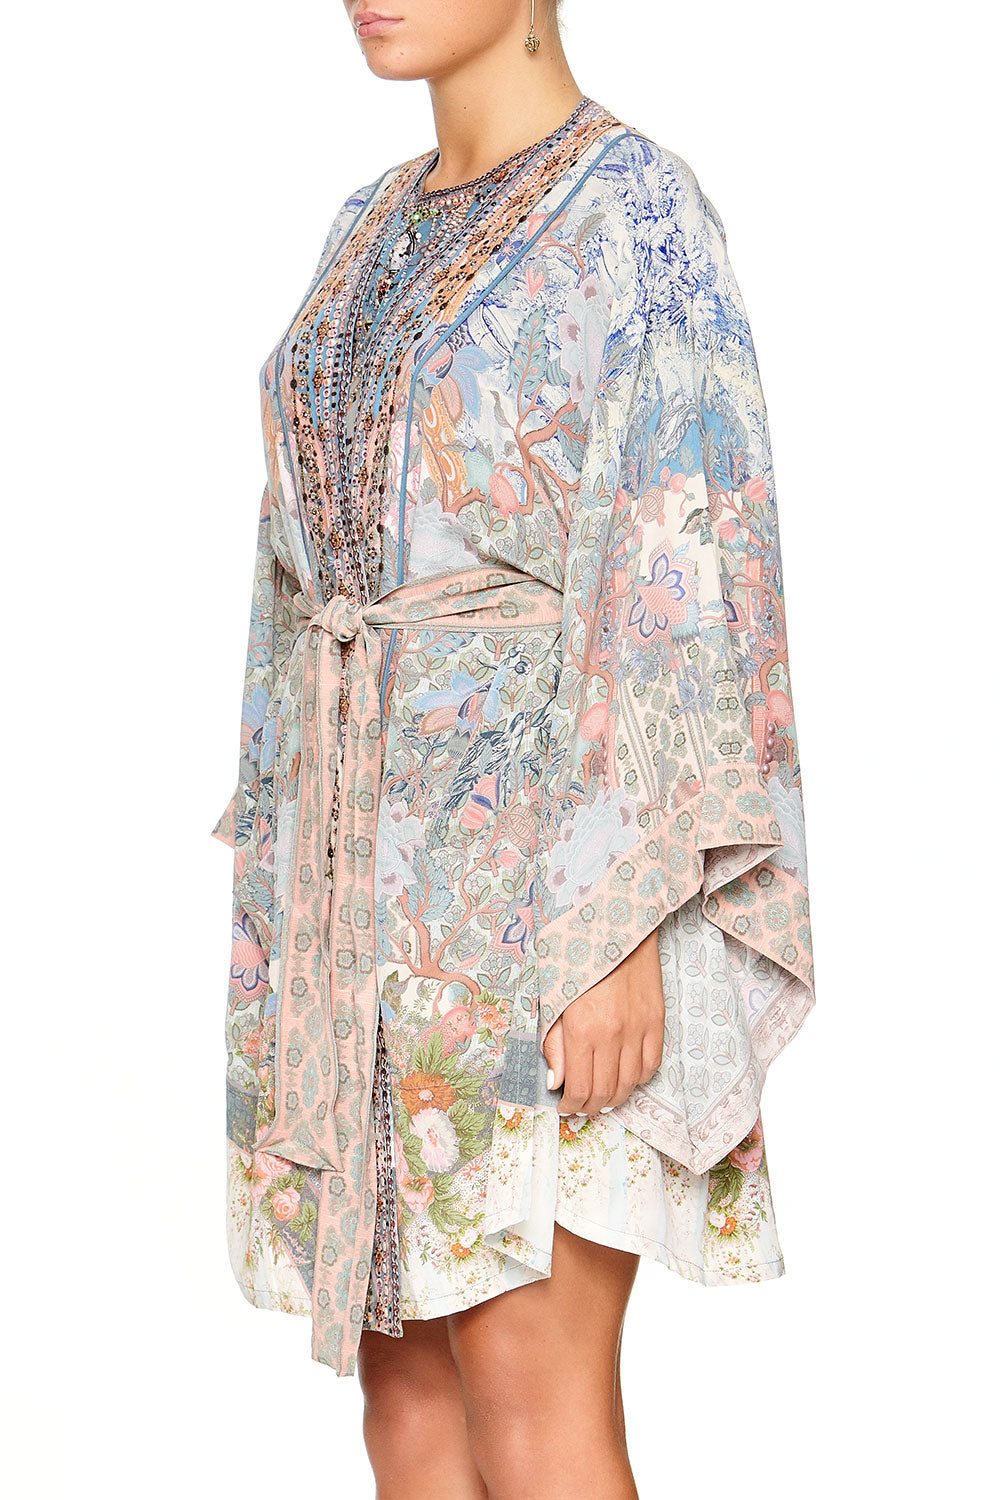 CAMILLA KIMONO WITH TIE BELT BLANCHES BLESSING